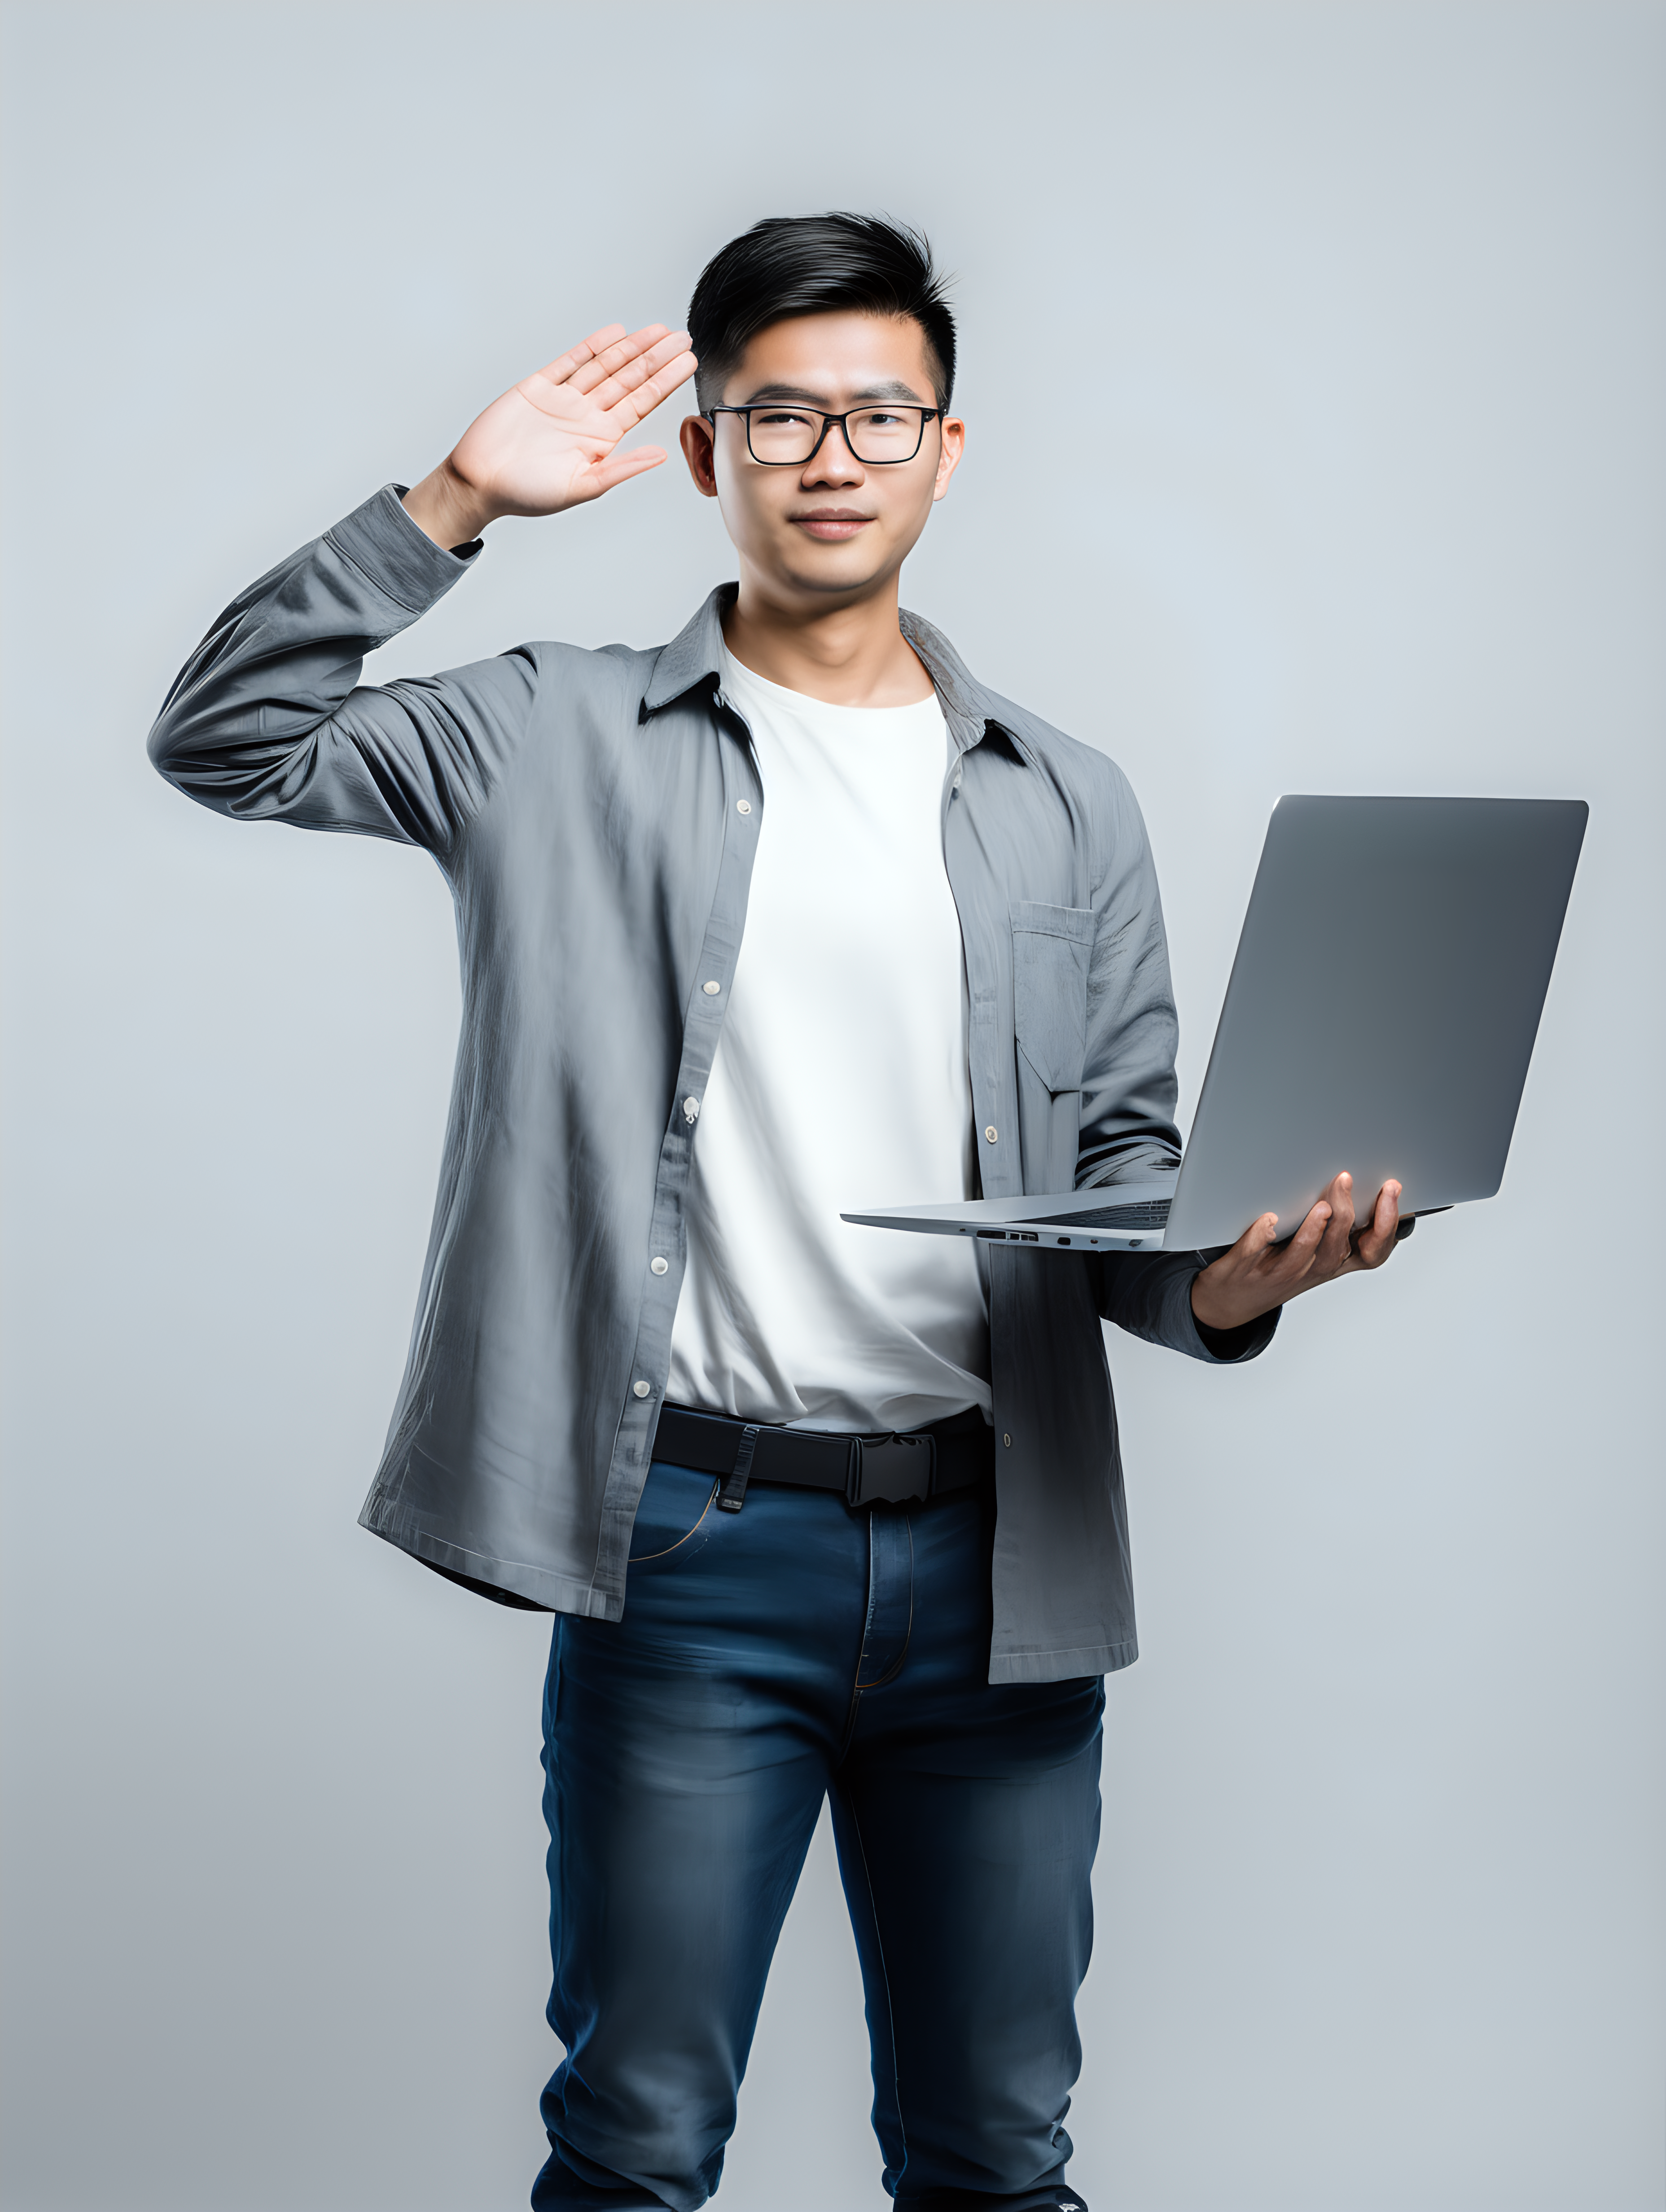 Asian Software developer standing to attention and saluting